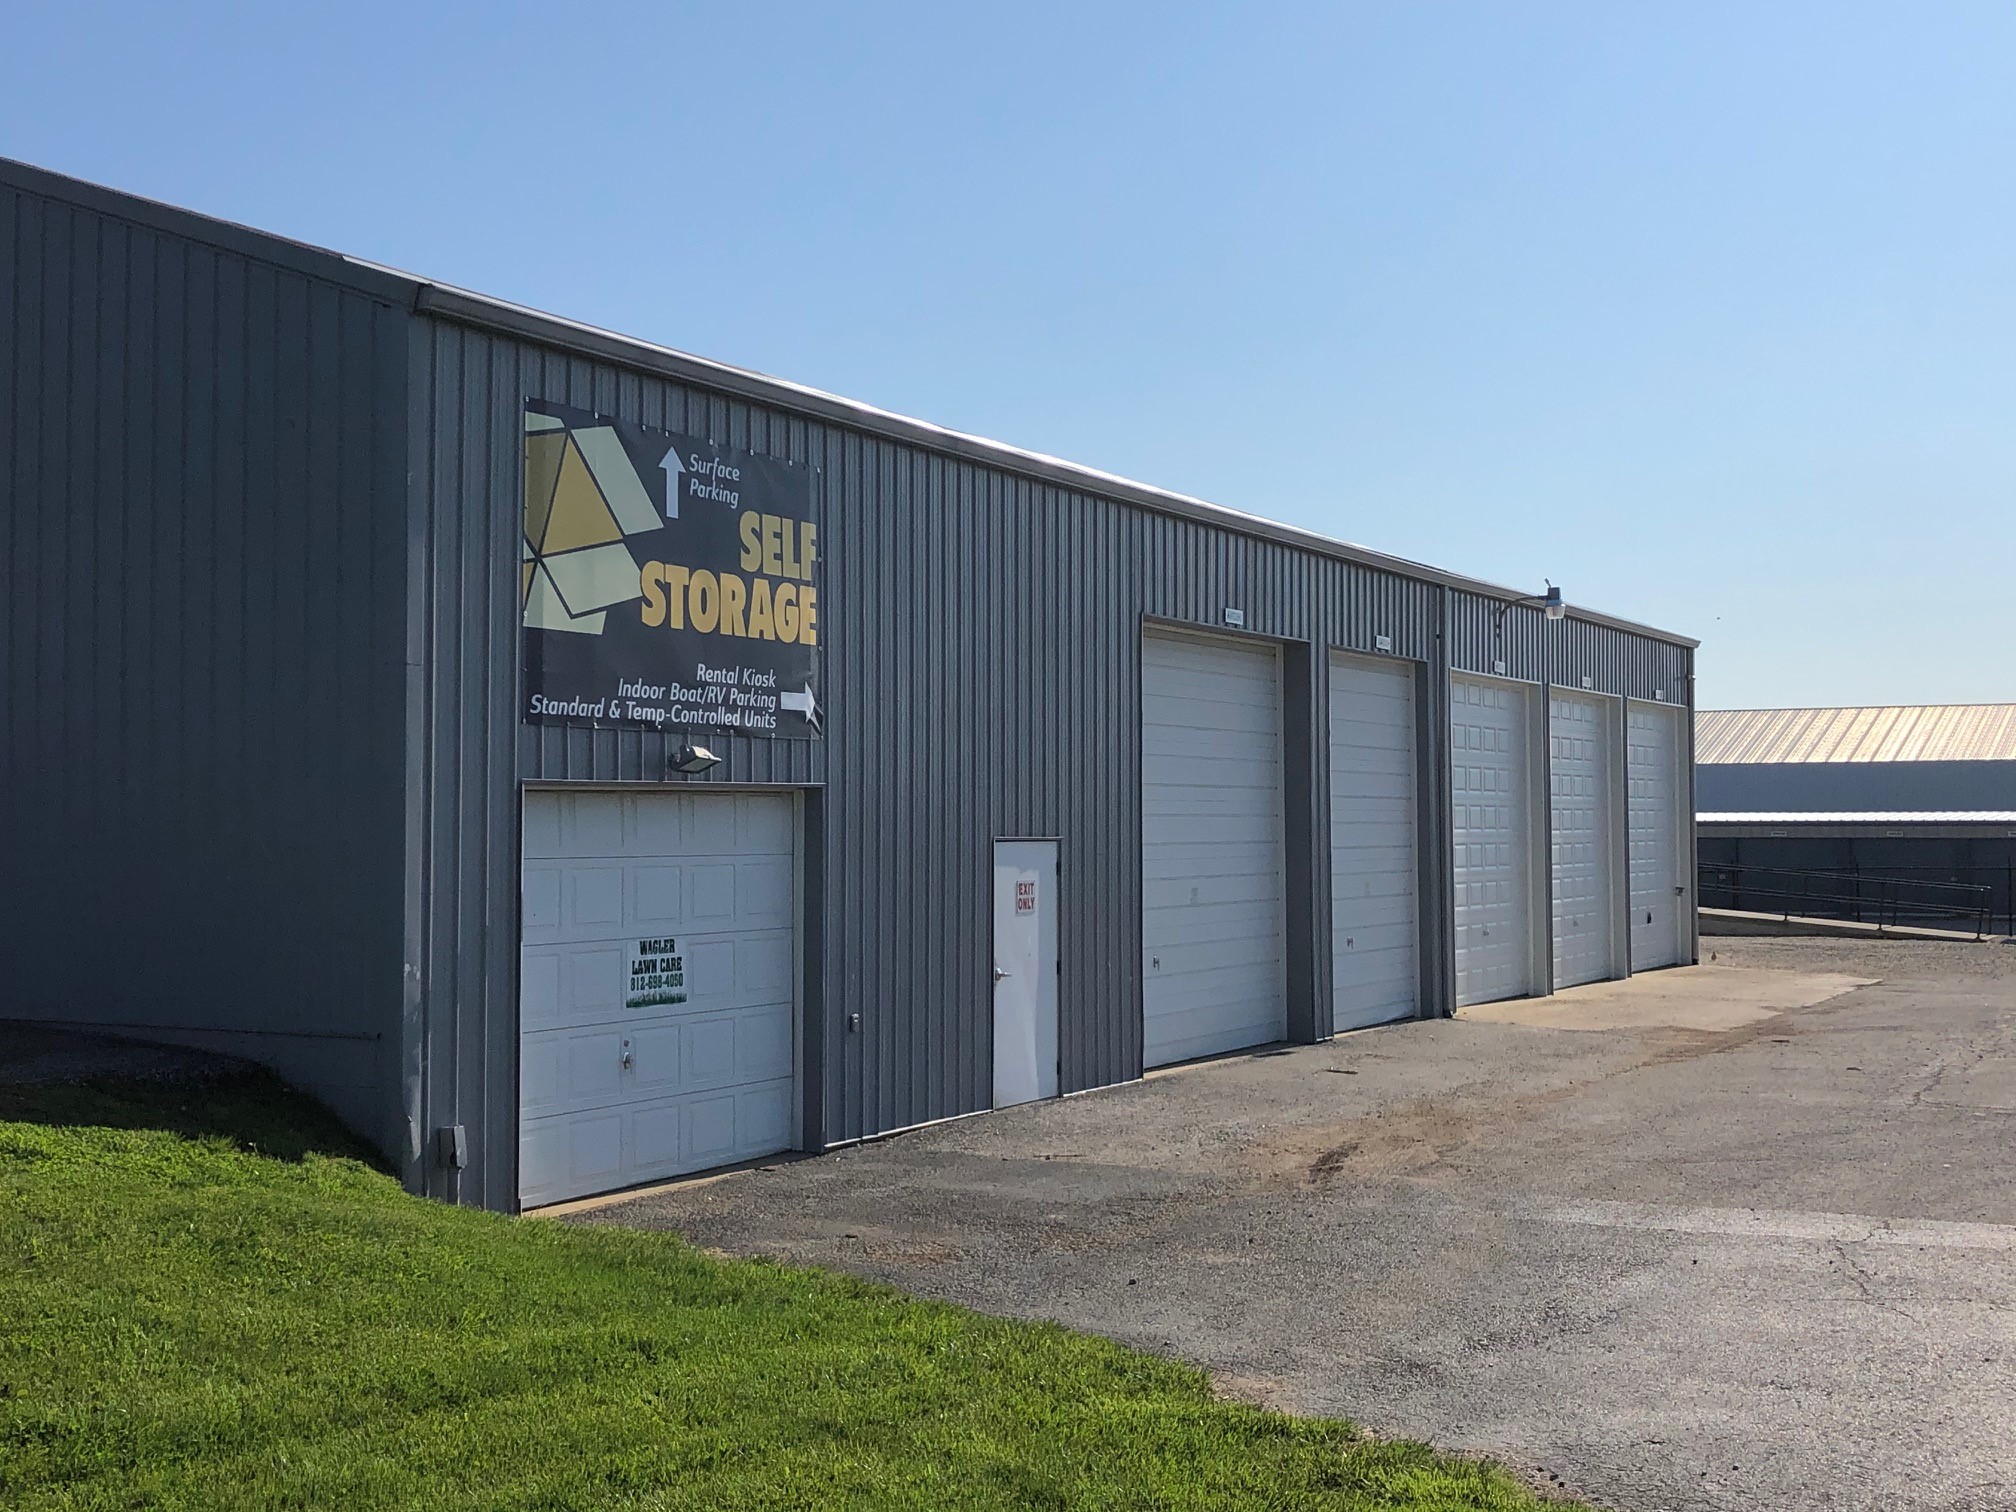 Washington, IN Access Storage offering drive-up and temperature-controlled units in a clean, secure environment for reliable storage solutions.